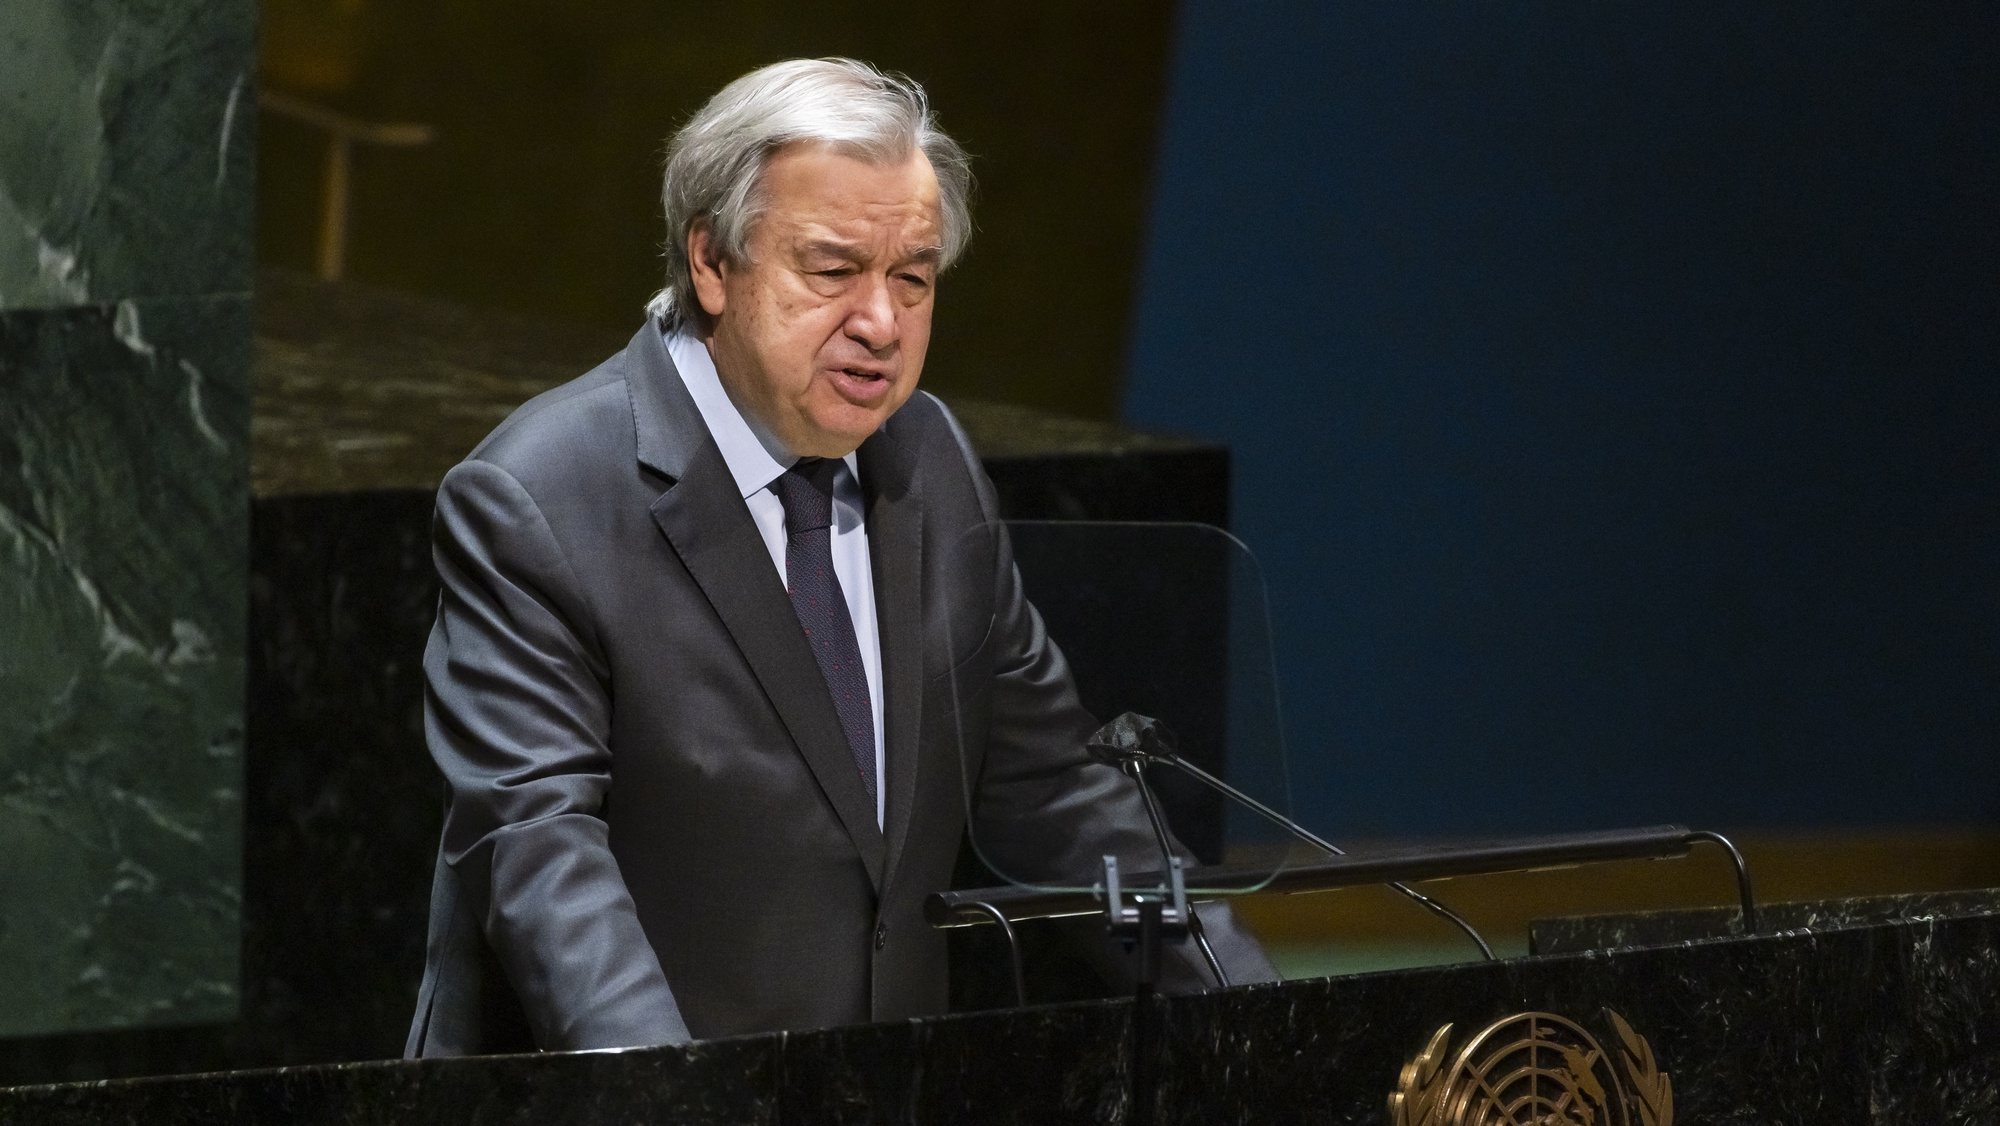 epa09792086 United Nations Secretary-General Antonio Guterres addresses an emergency session of the United Nations General Assembly called to consider a resolution condemning Russia&#039;s invasion of Ukraine at United Nations headquarters in New York, New York, USA, 28 February 2022. The UN Security Council voted on a similar resolution on 25 February but the measure was vetoed by Russia which wields that power as one of five permanent members of the council.  EPA/JUSTIN LANE